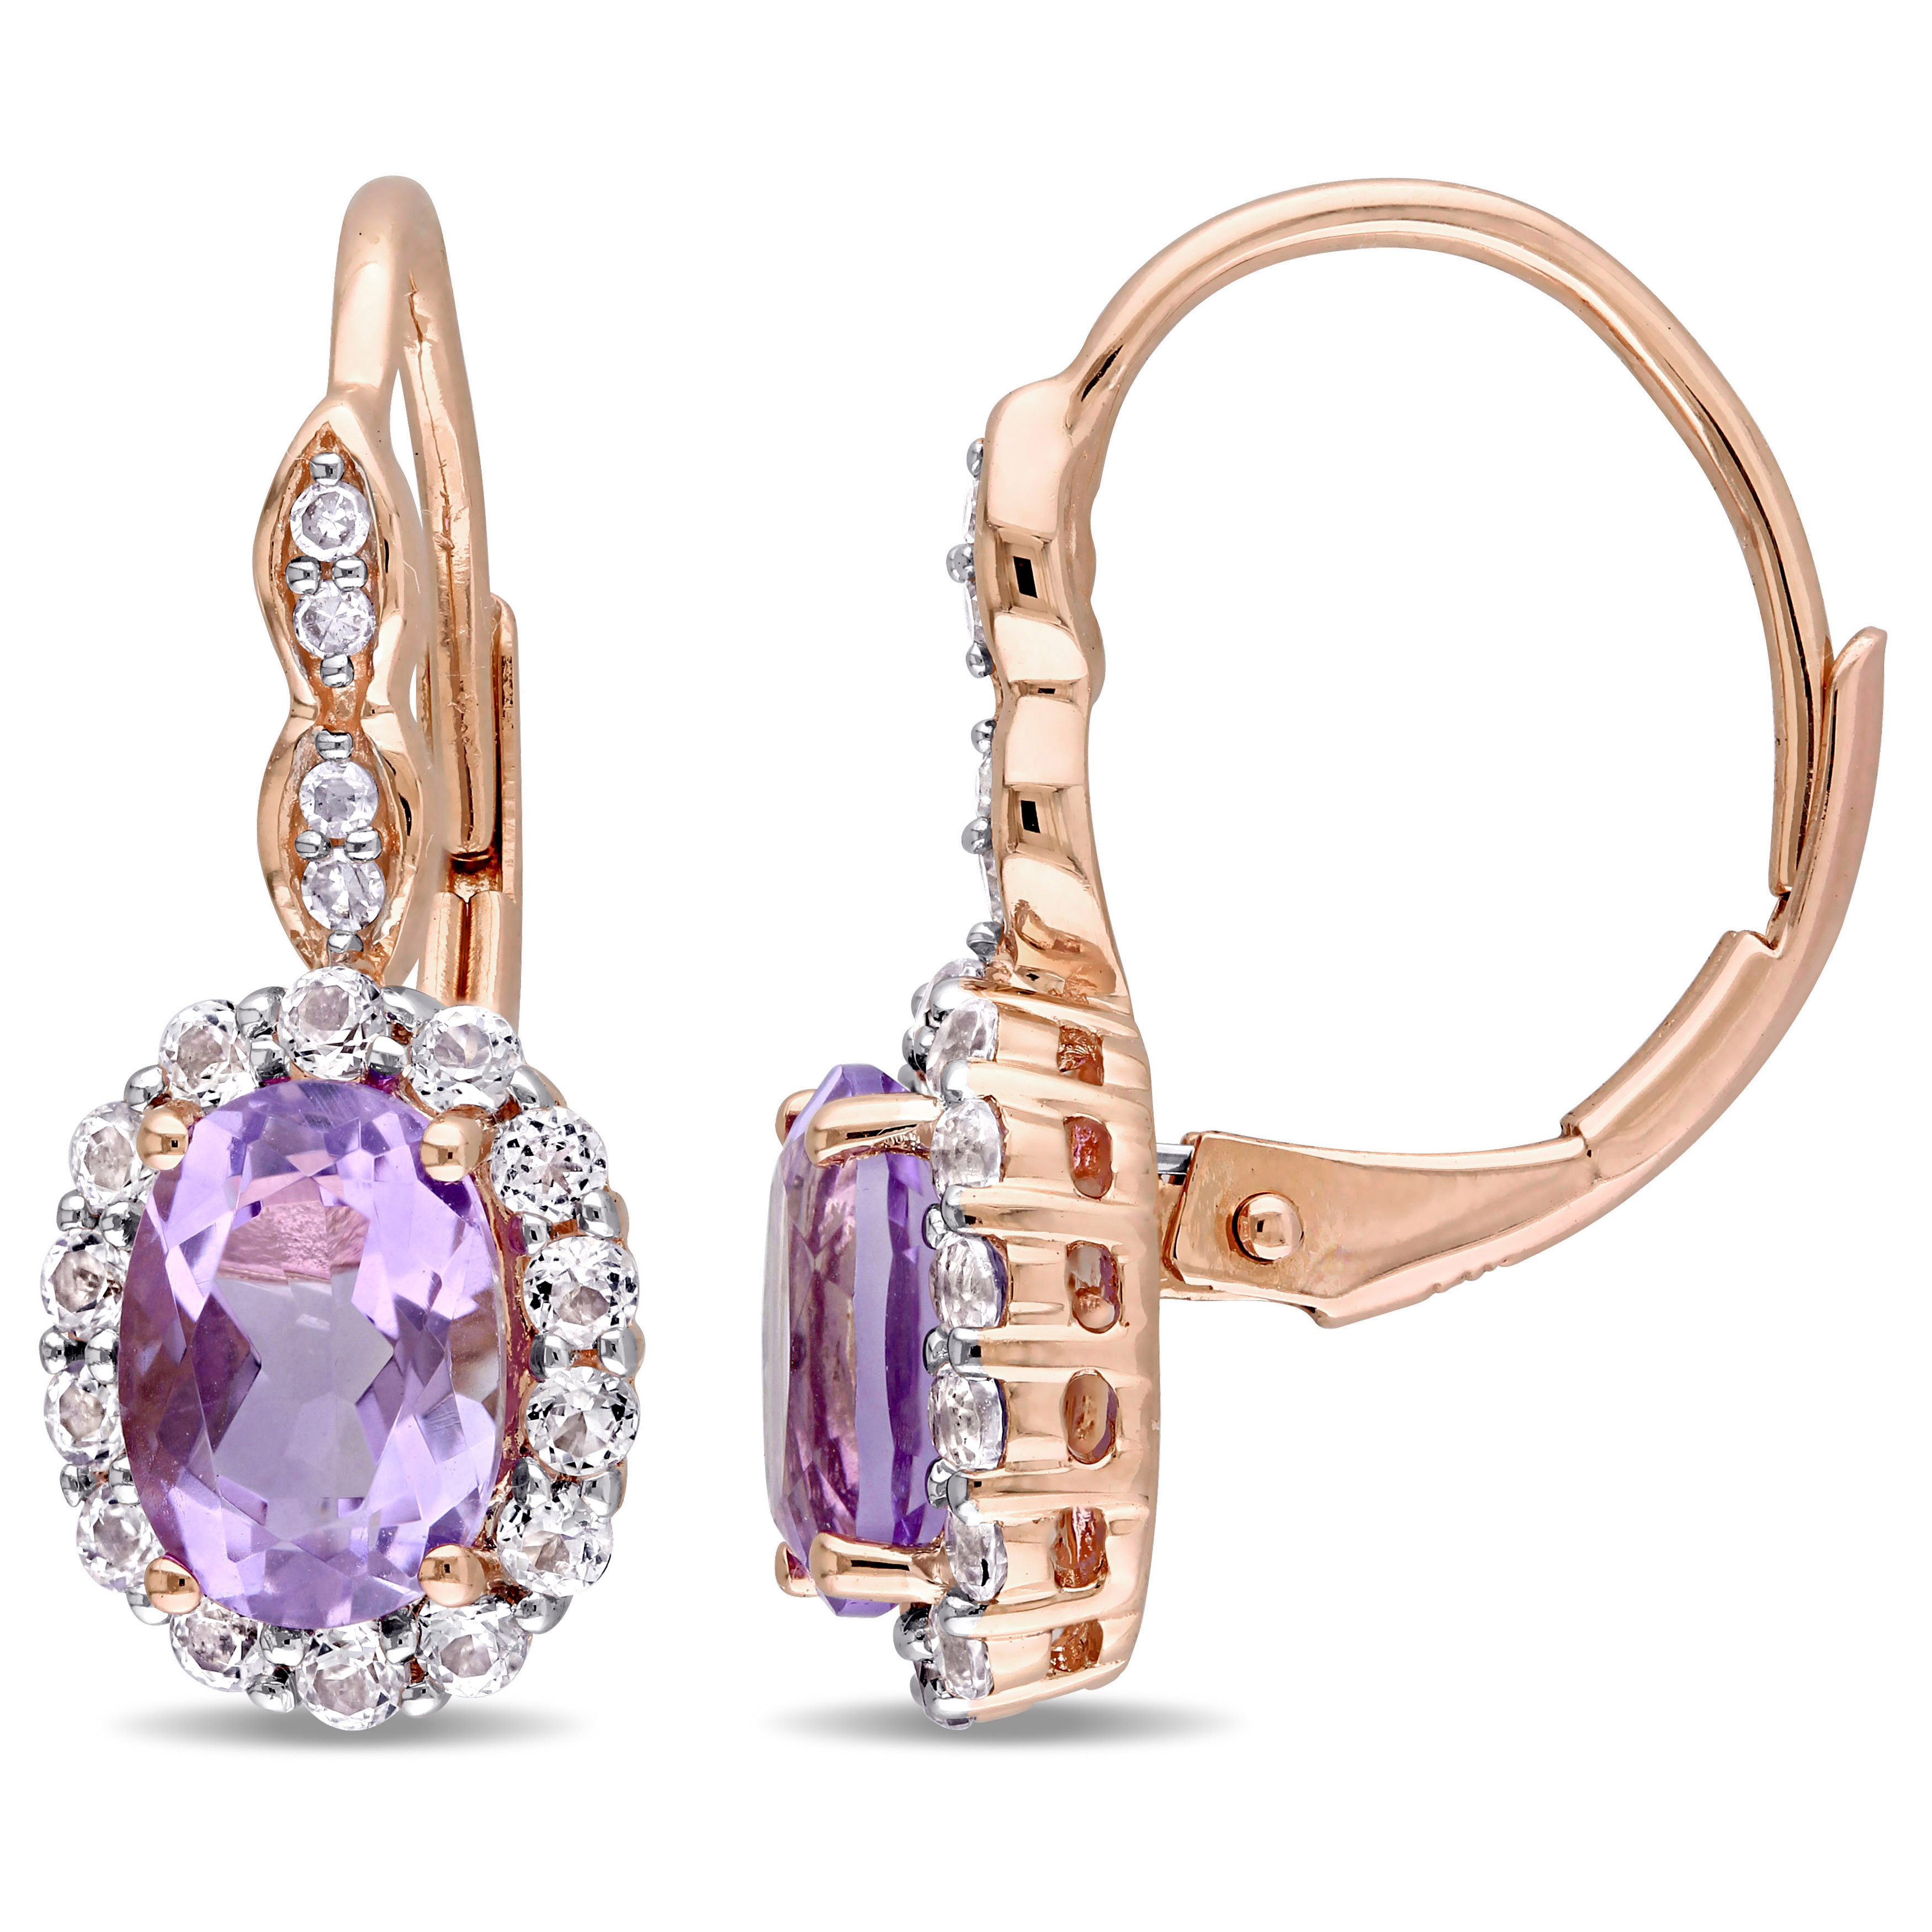 2 1/4 CT TGW Oval Shape Amethyst, White Topaz and Diamond Accent Vintage LeverBack Earrings in 14k Rose Gold